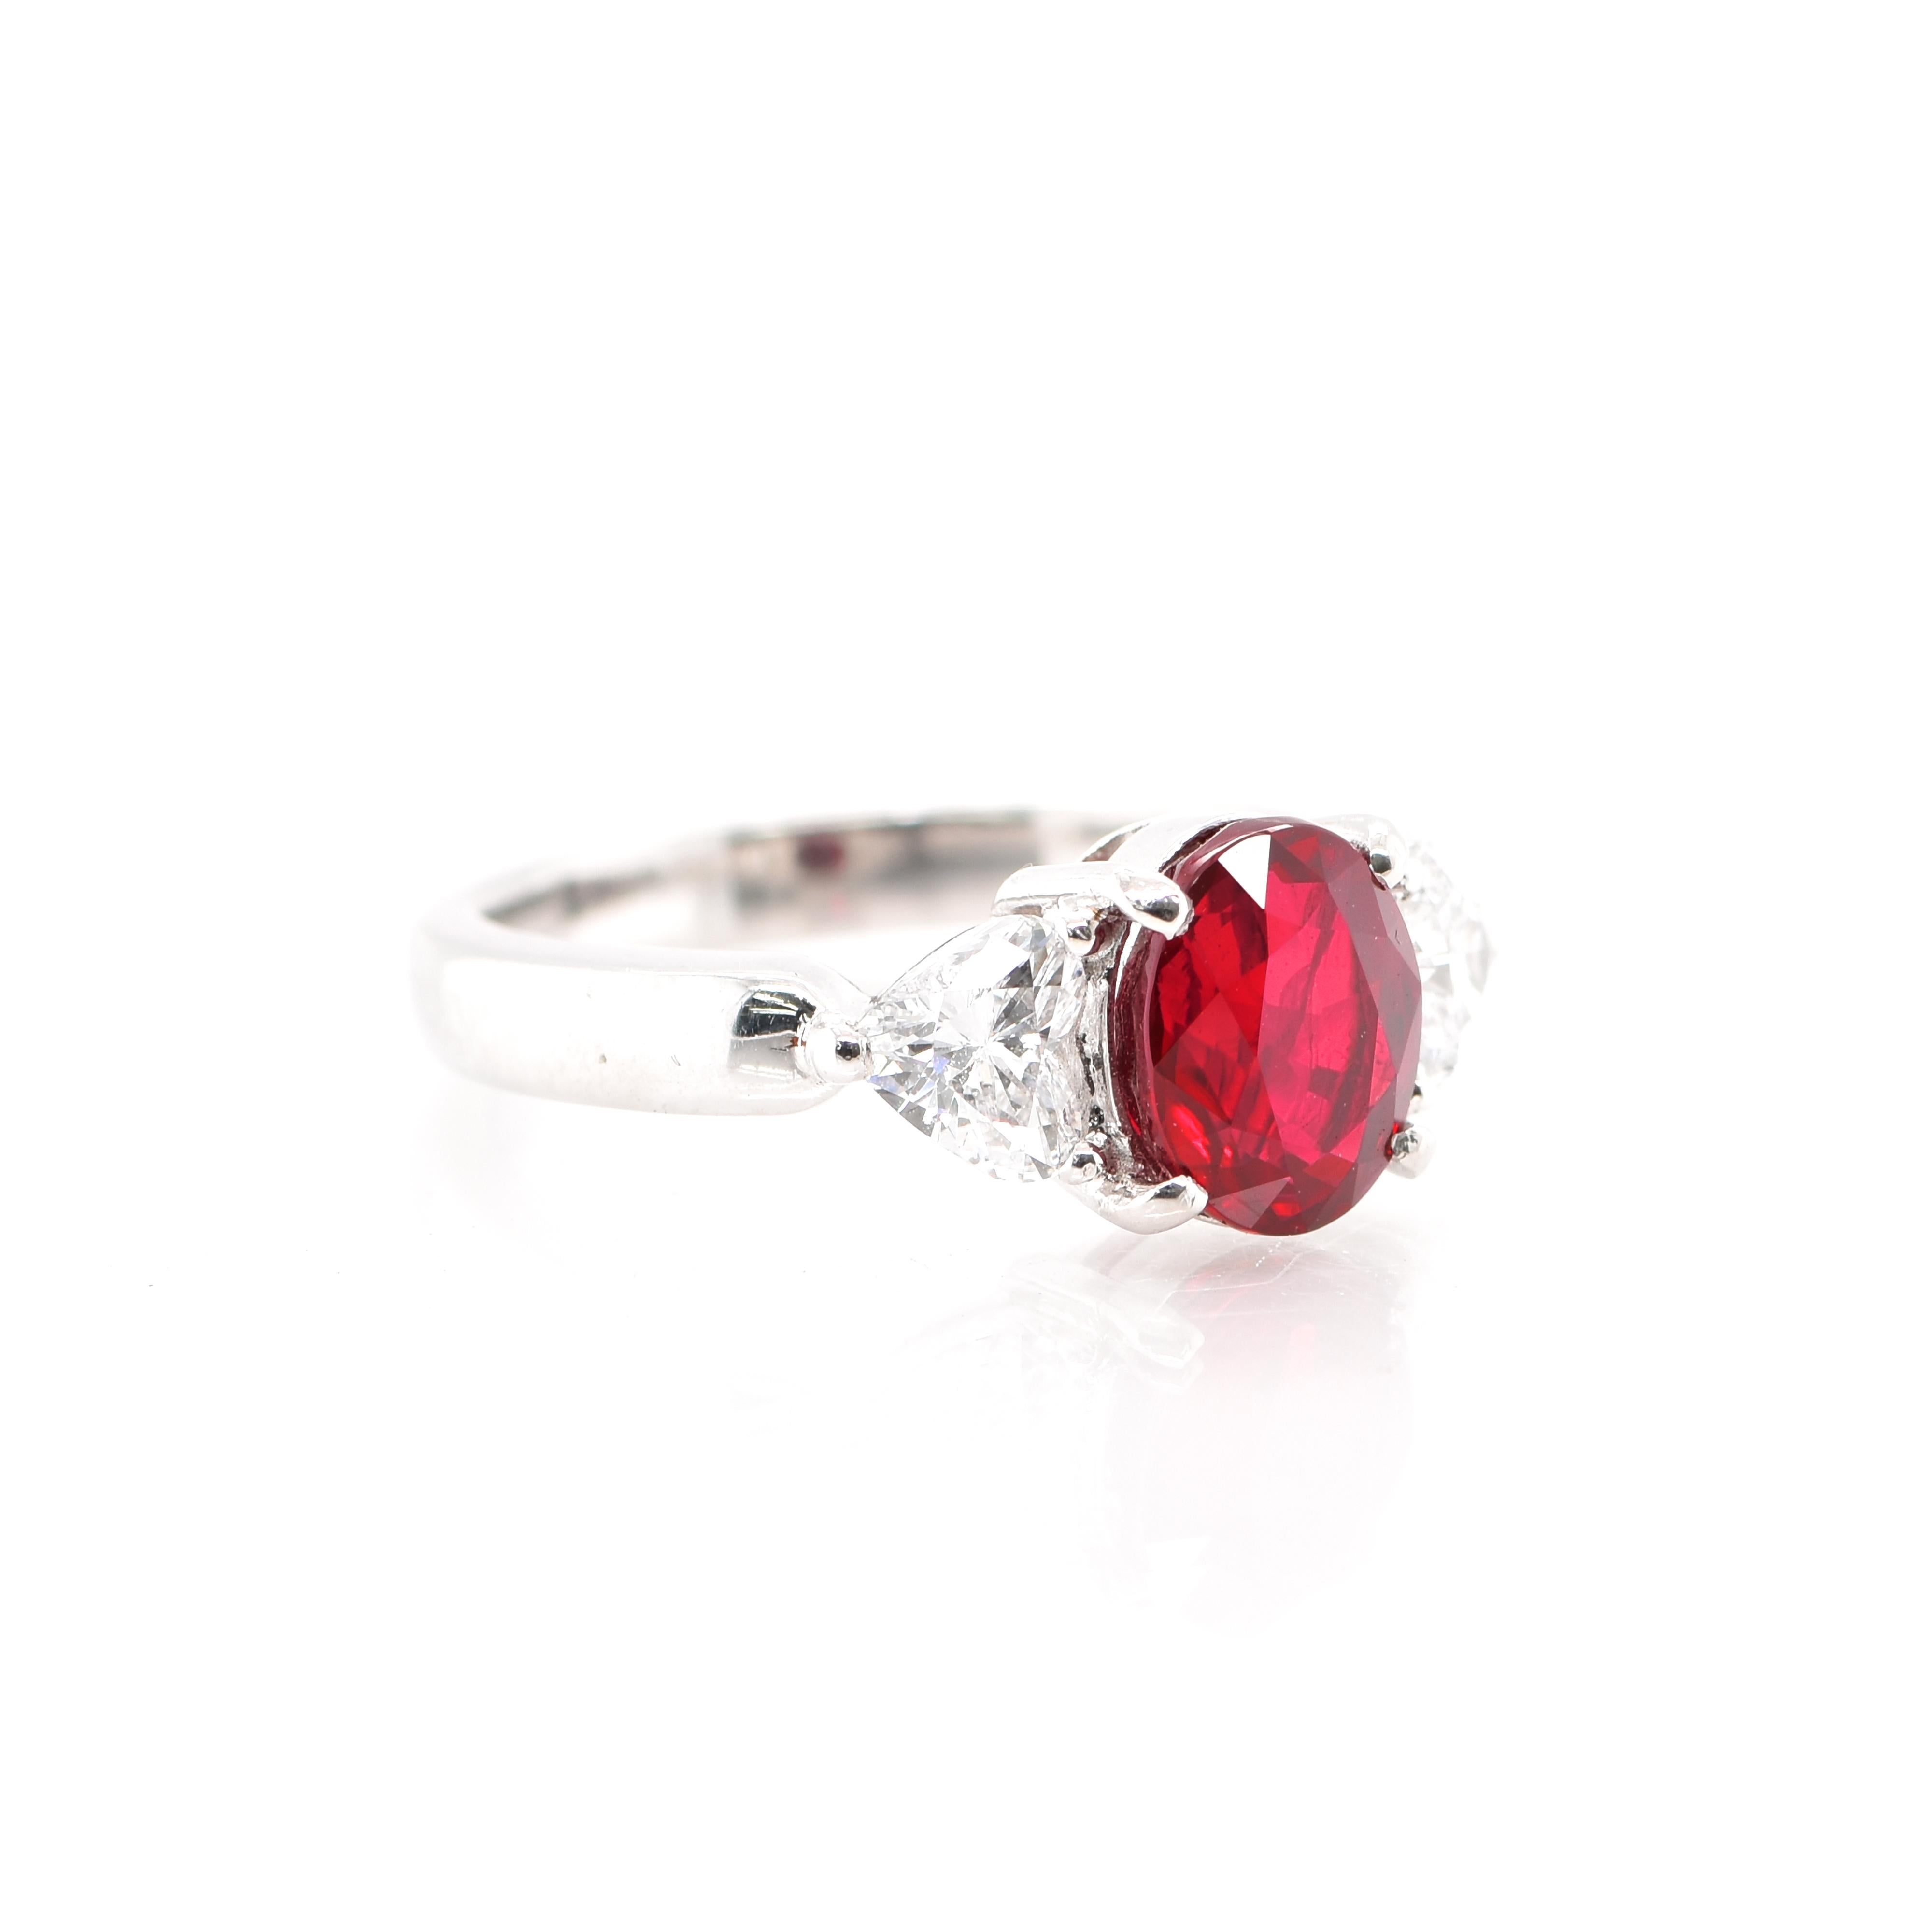 Oval Cut 2.46 Carat Pigeon's Blood Burmese Ruby and Diamond Ring Set in Platinum